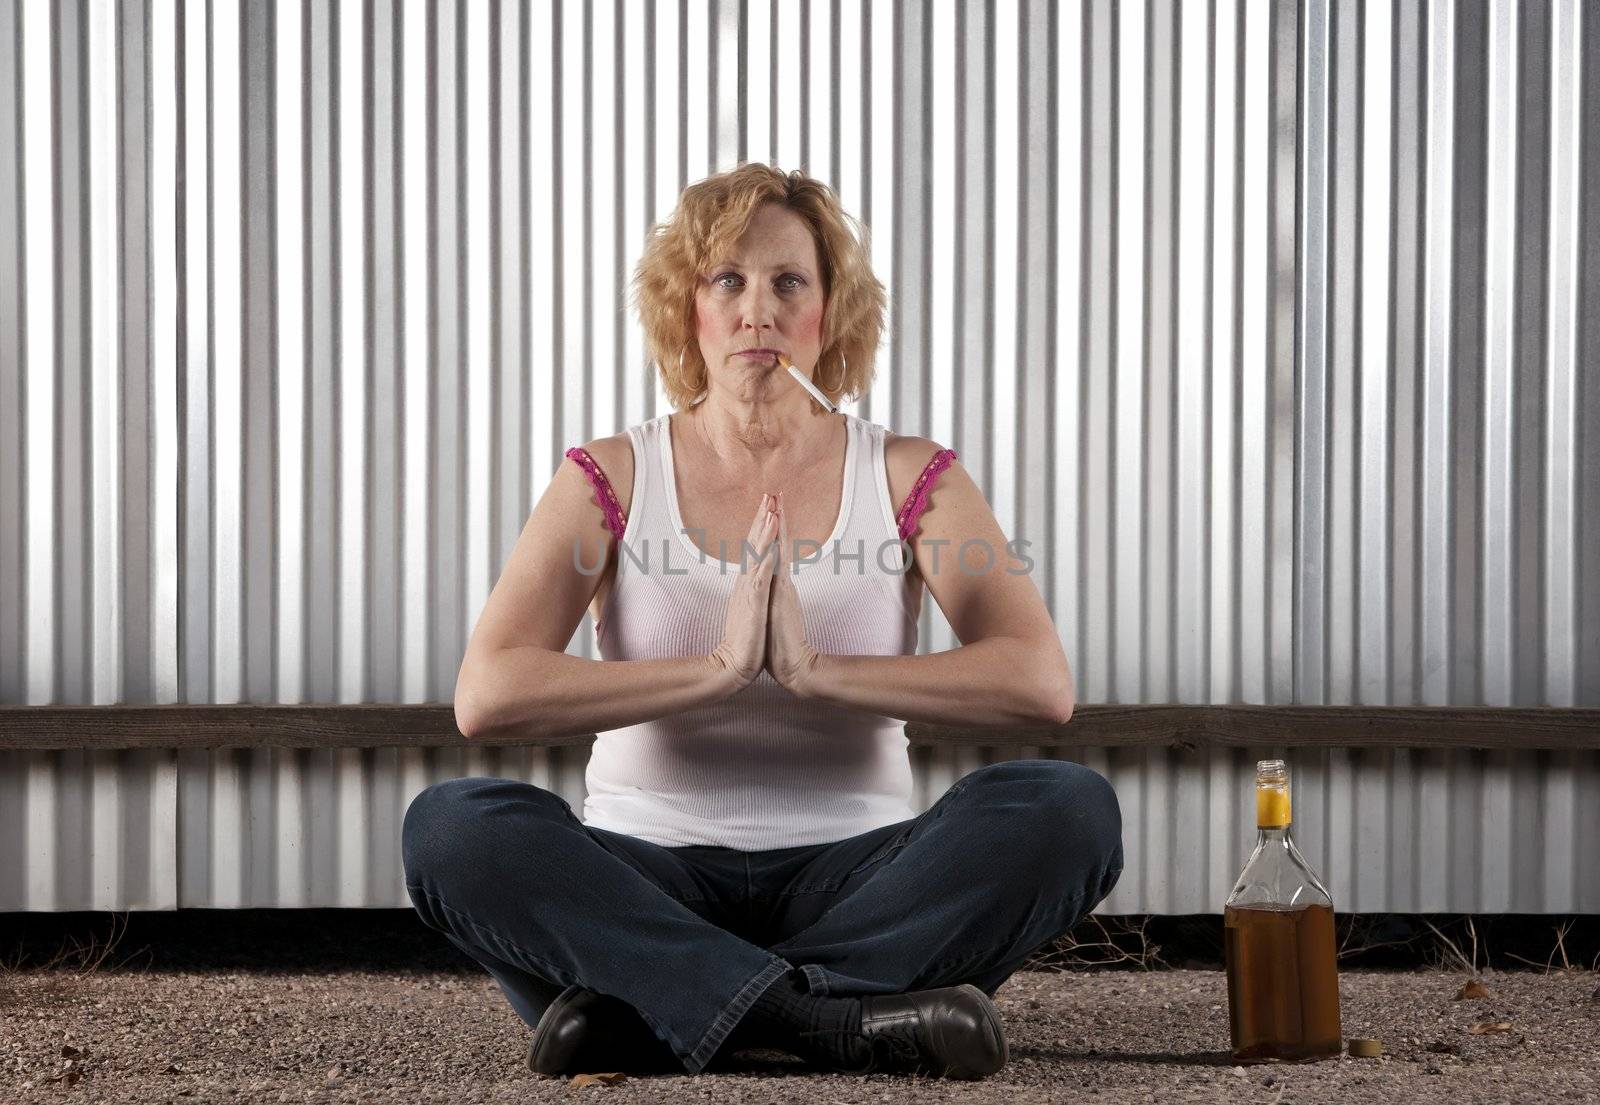 Woman meditating with cigarette and tequila bottle